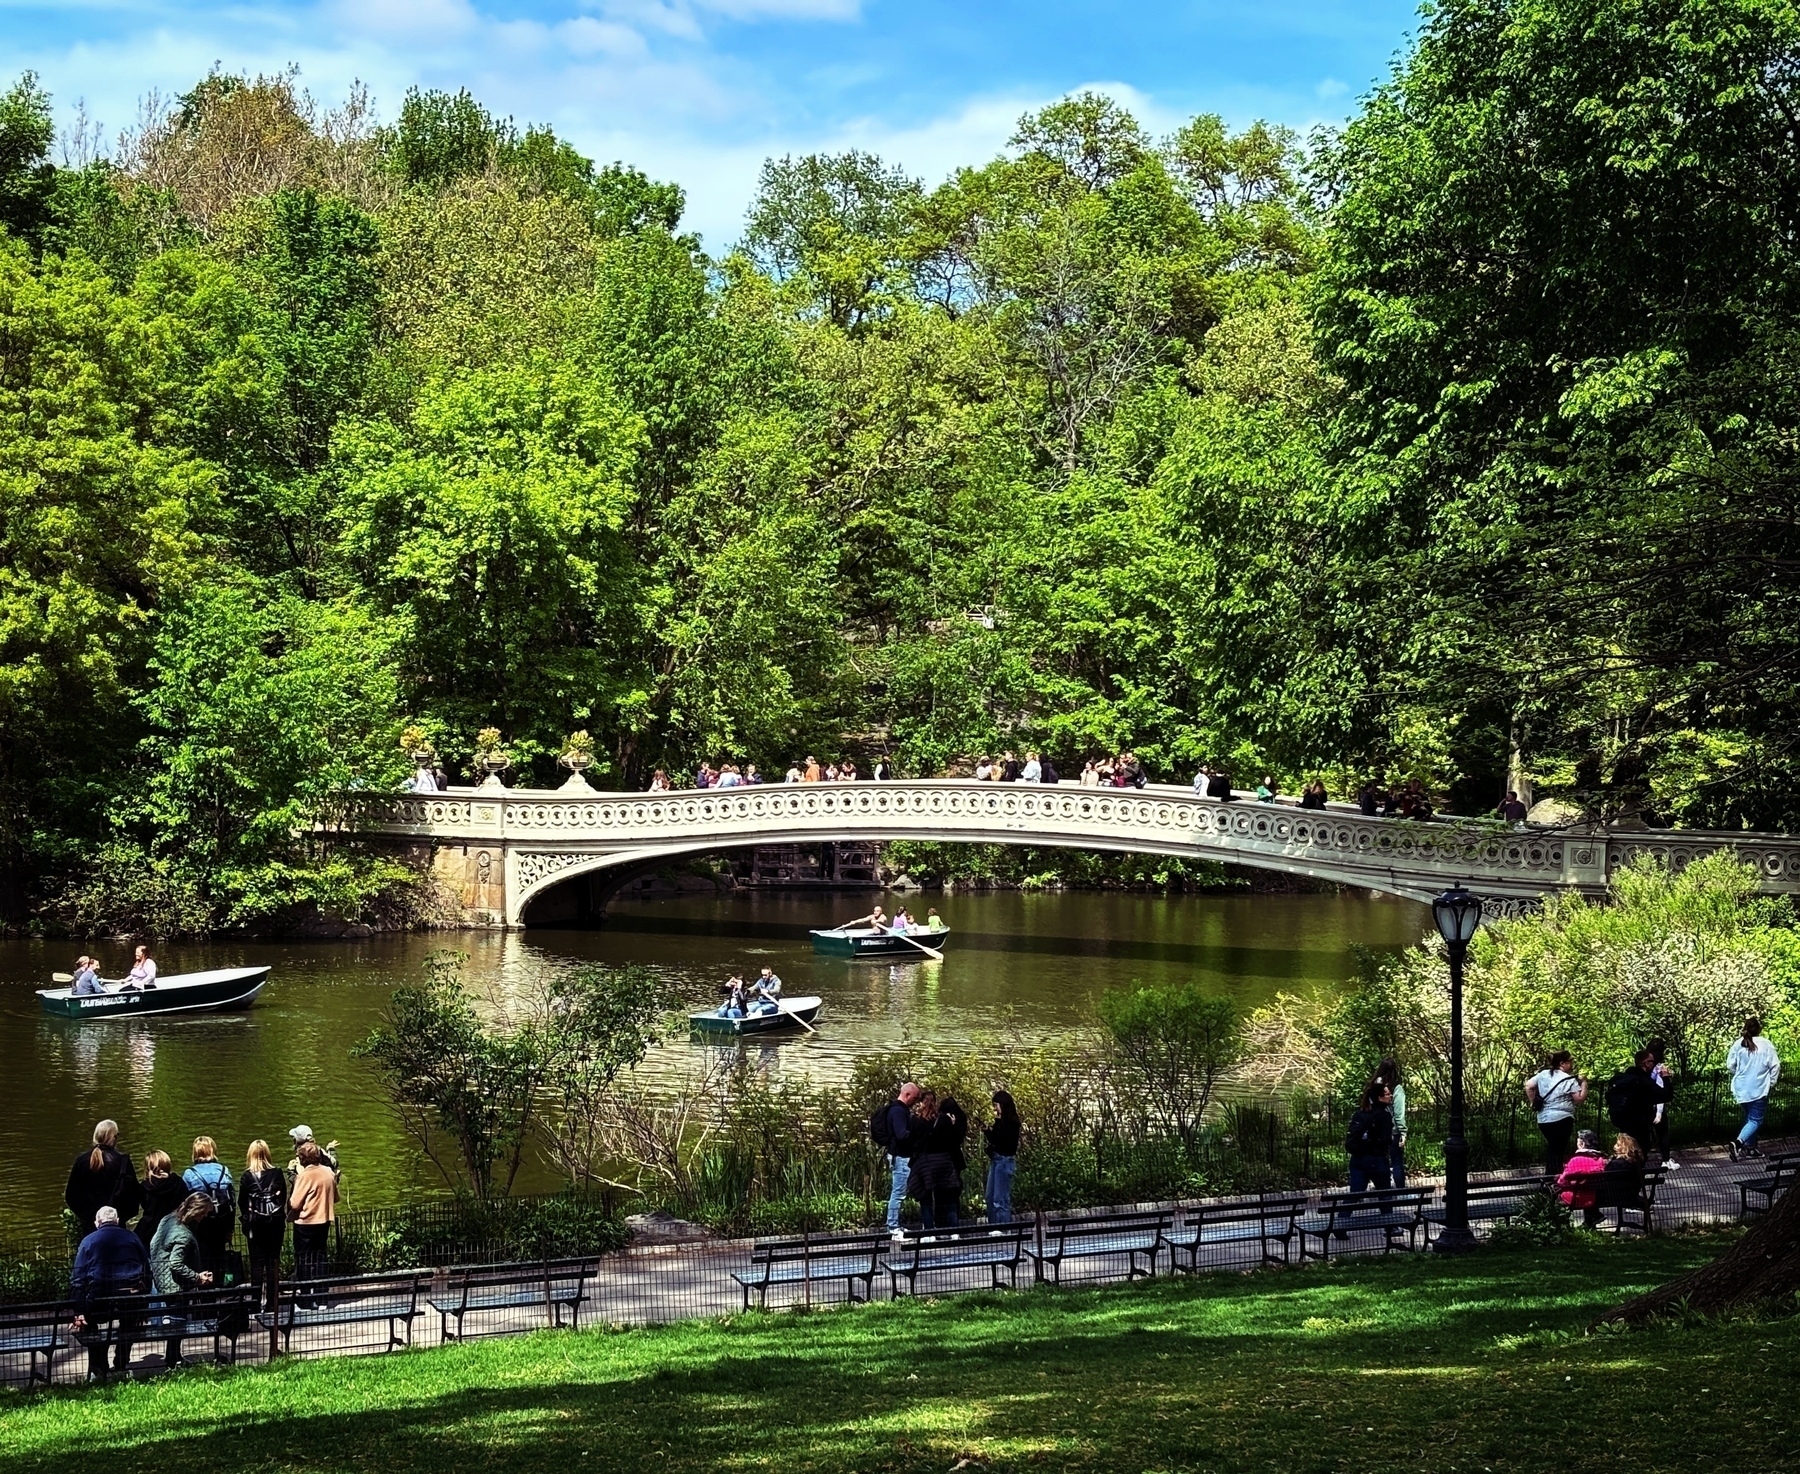 I wooden bridge over a calm brook in Central Park. Green trees and grass, people walking about, beautiful spring day